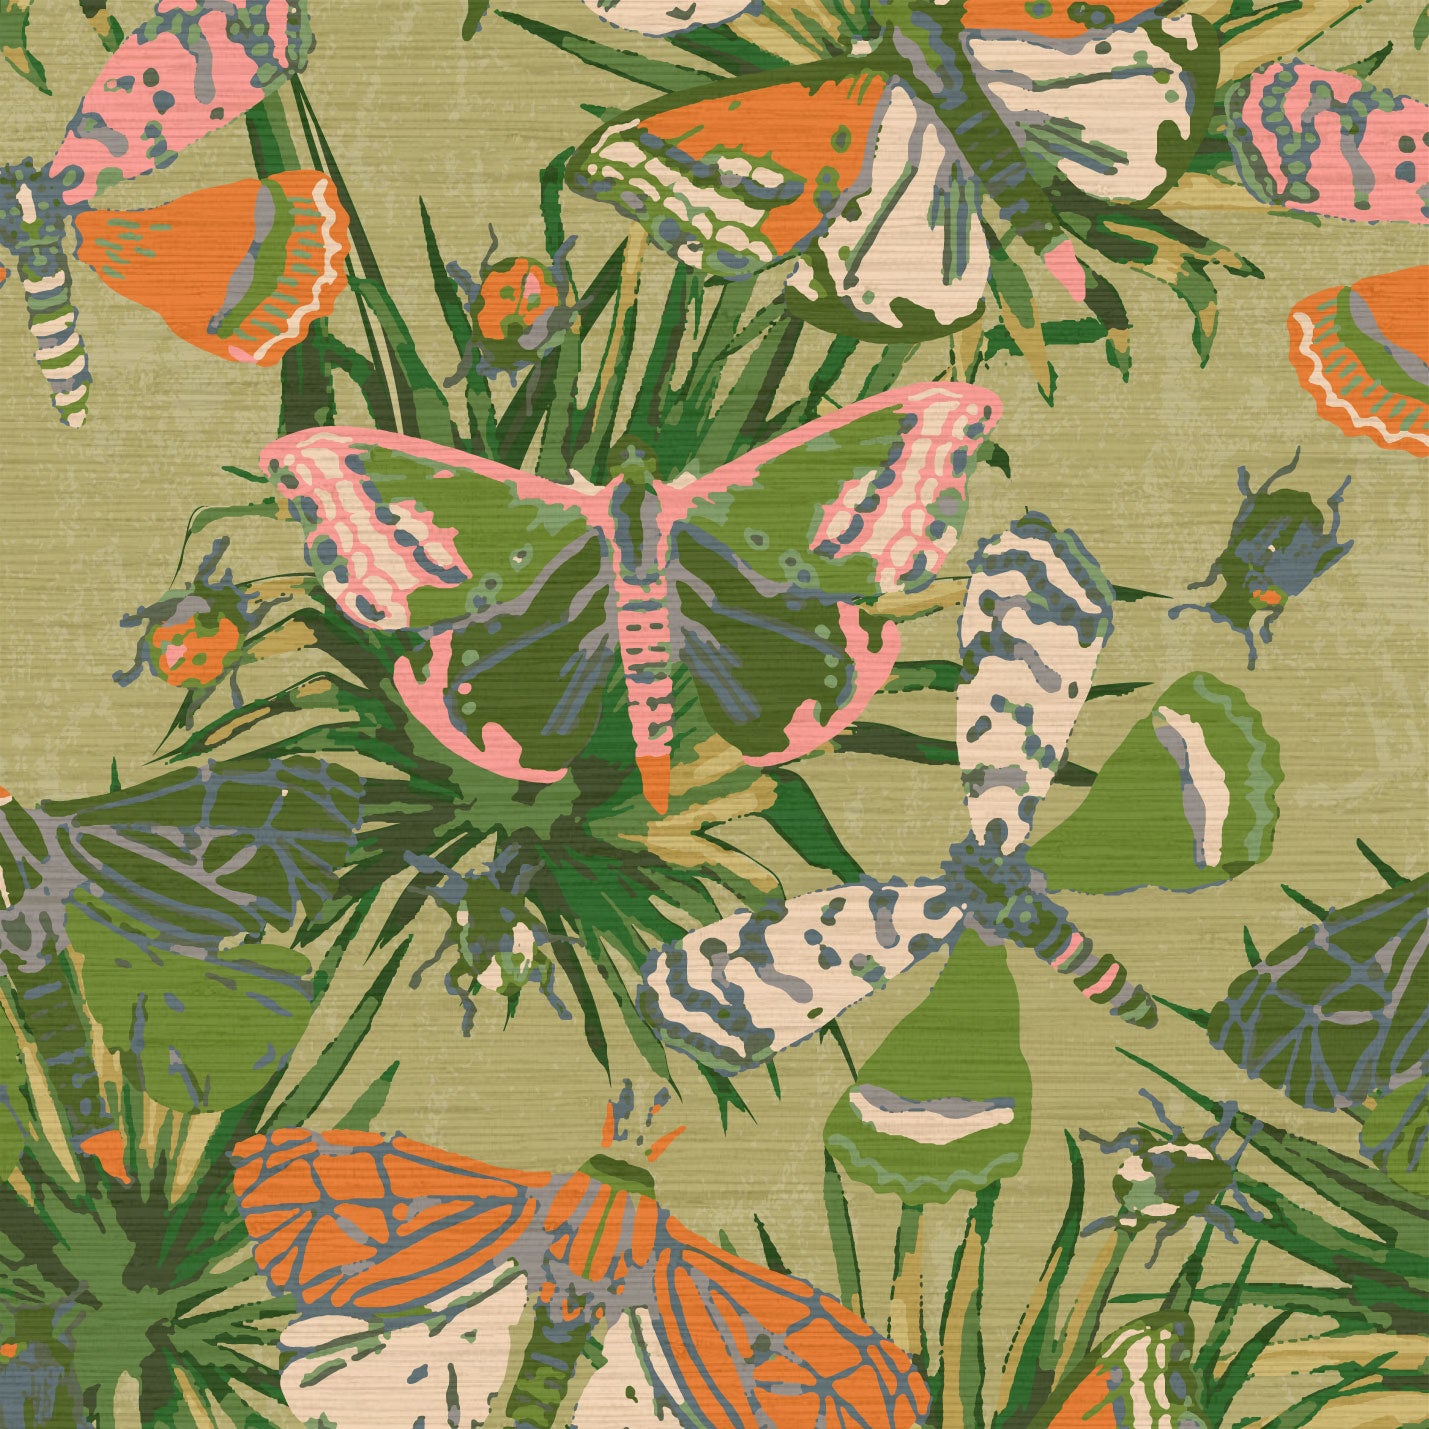 Load image into Gallery viewer, Grasscloth wallpaper Natural Textured Eco-Friendly Non-toxic High-quality Sustainable Interior Design Bold Custom Tailor-made Retro chic Bold tropical butterfly bug palm leaves animals botanical garden nature kids playroom bedroom nursery green moss jungle olive
